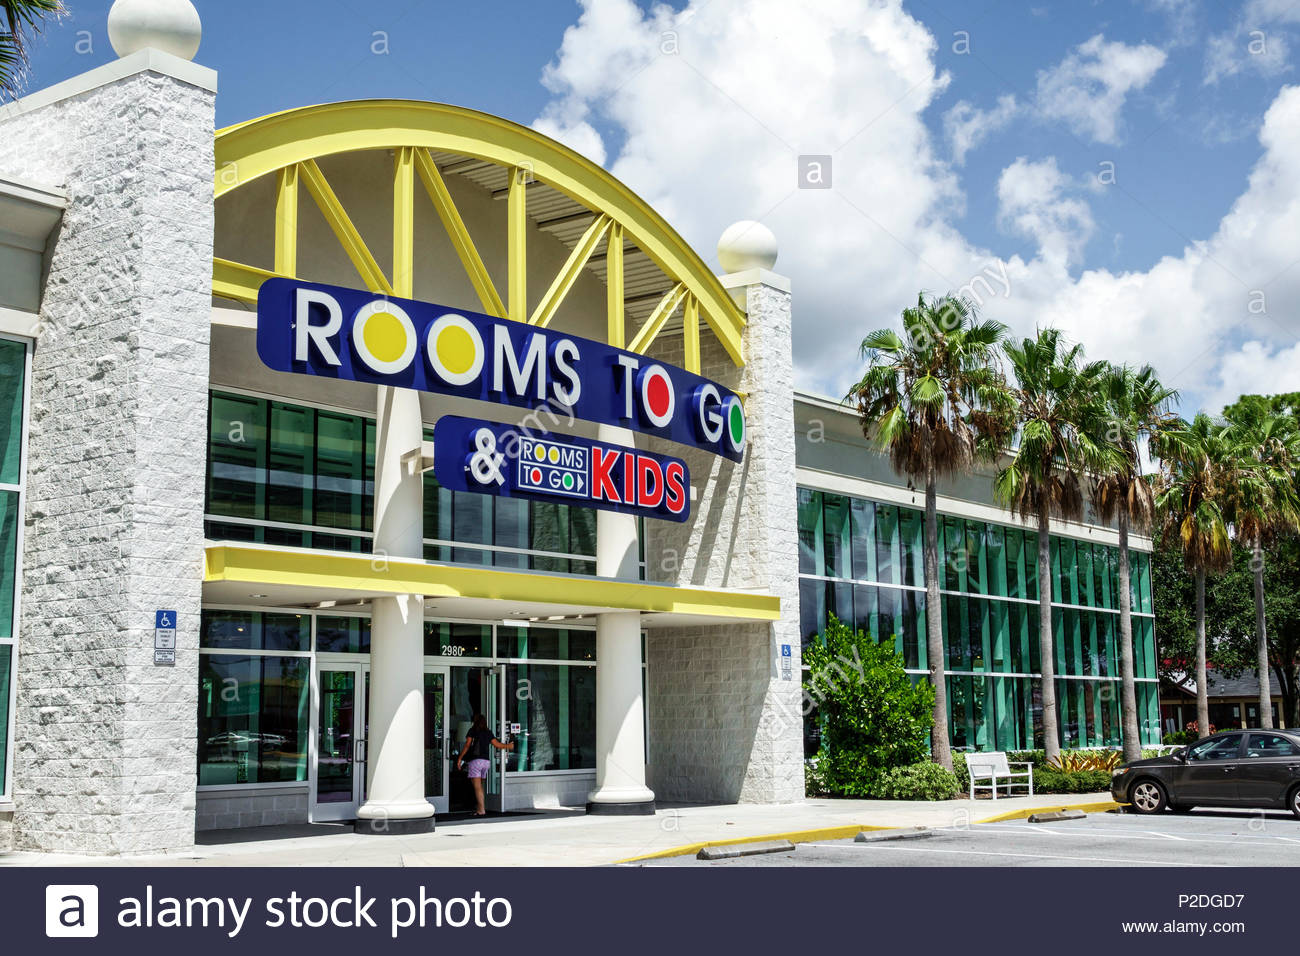 Rooms To Go Kids Stock Photos Rooms To Go Kids Stock